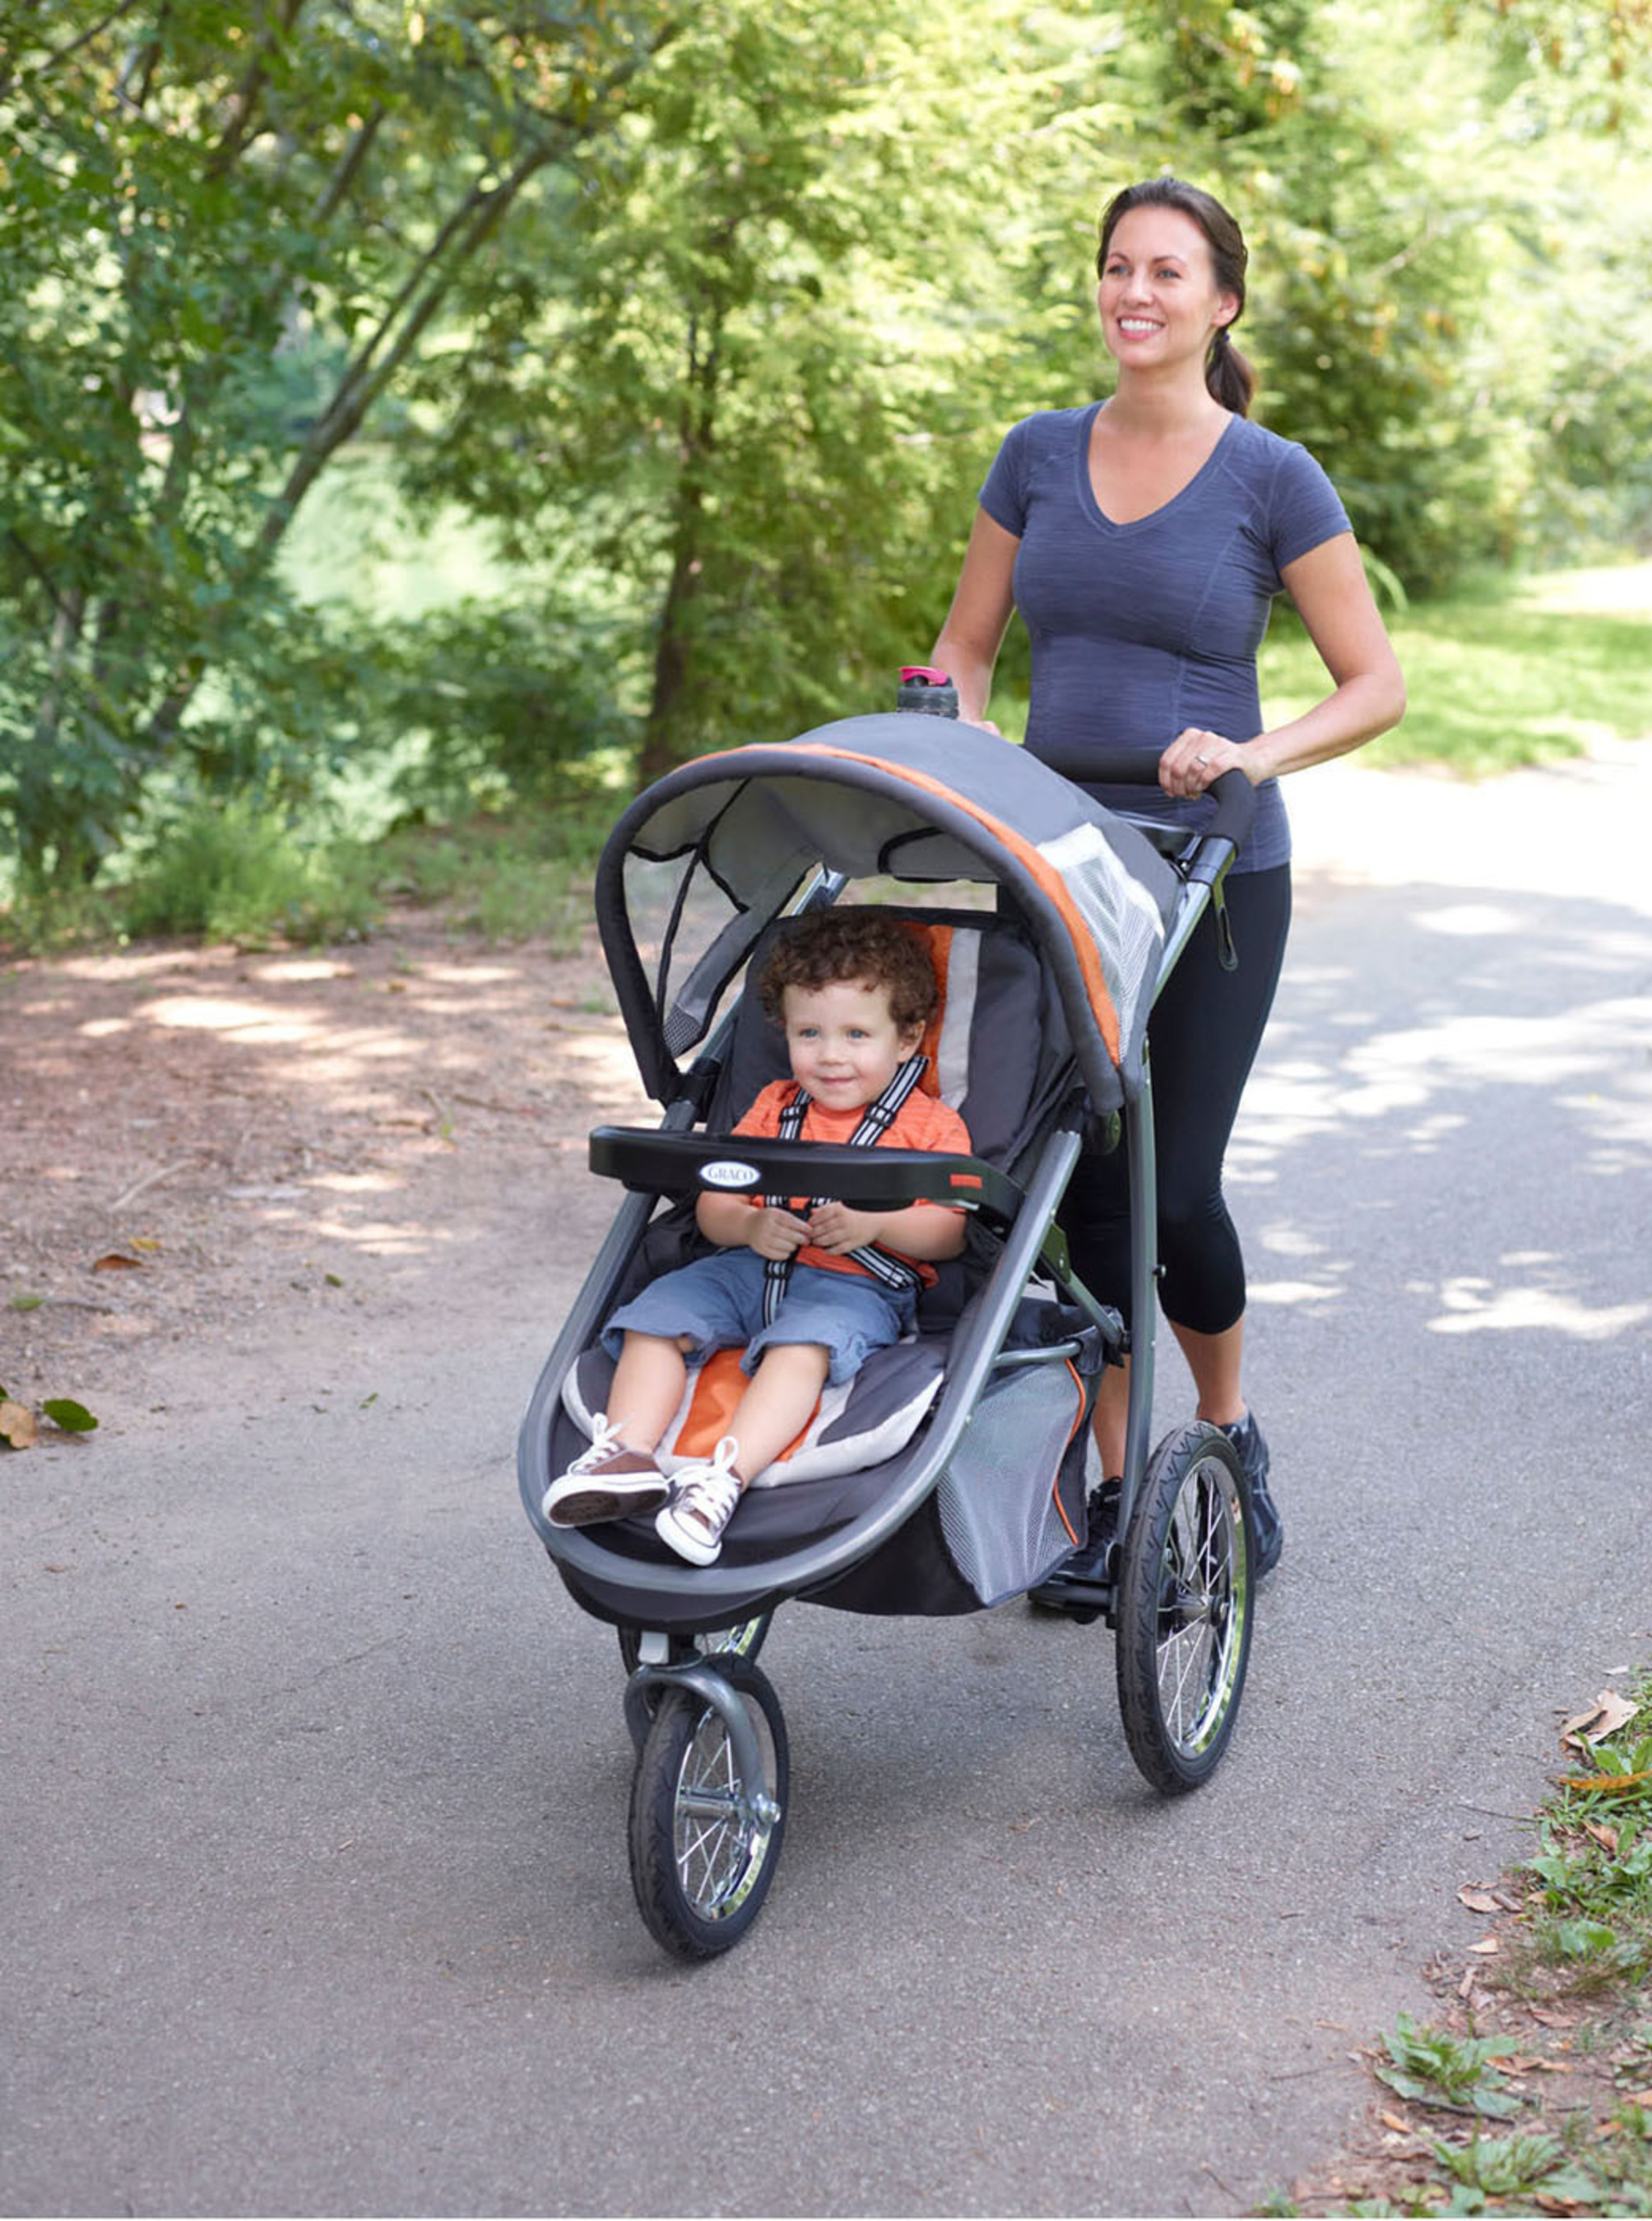 Graco's new FastAction Fold Jogger Click Connect combines the comfort and convenience of a traditional stroller with the performance and maneuverability of an all-terrain jogger. (PRNewsFoto/Graco) (PRNewsFoto/GRACO)